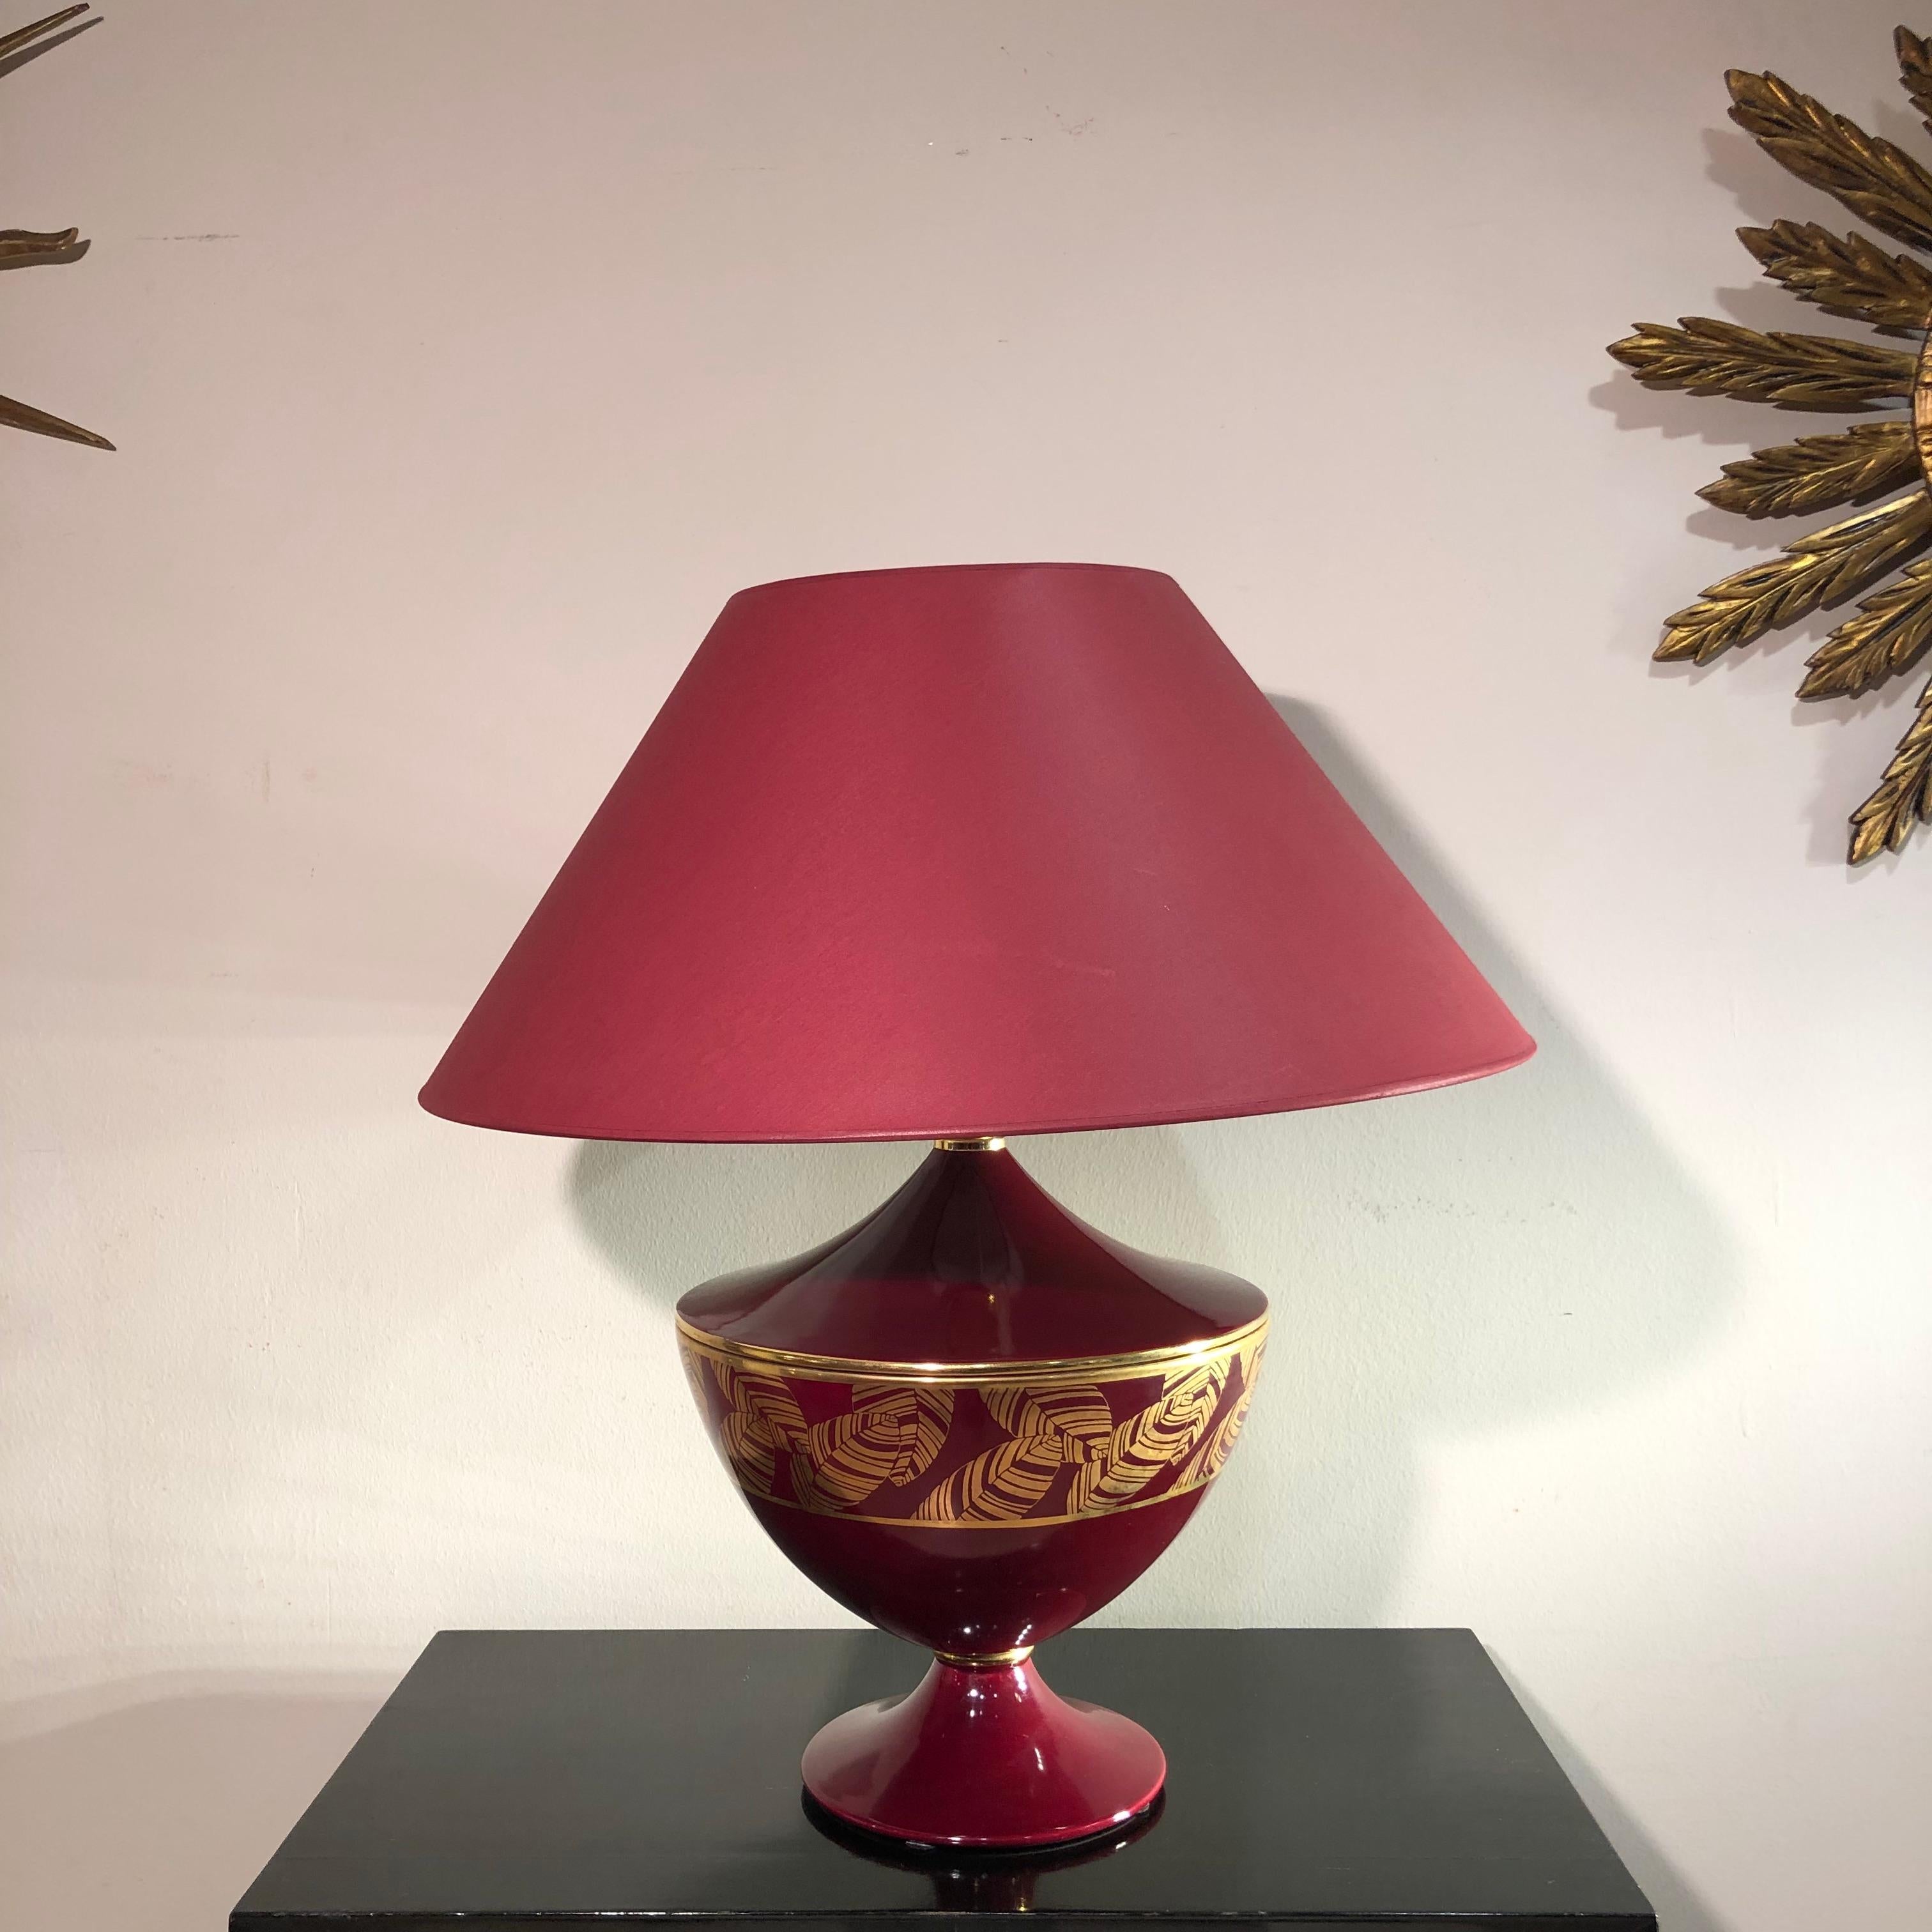 Italian red and gold floral details ceramic table lamps, 1980s Bosa production

Two very scenic and big ceramic red and decorative floral motive gold details table lamps. Production Bosa, Italy, 1980s. 

Size: Height 70 cm, diameter 60 cm with